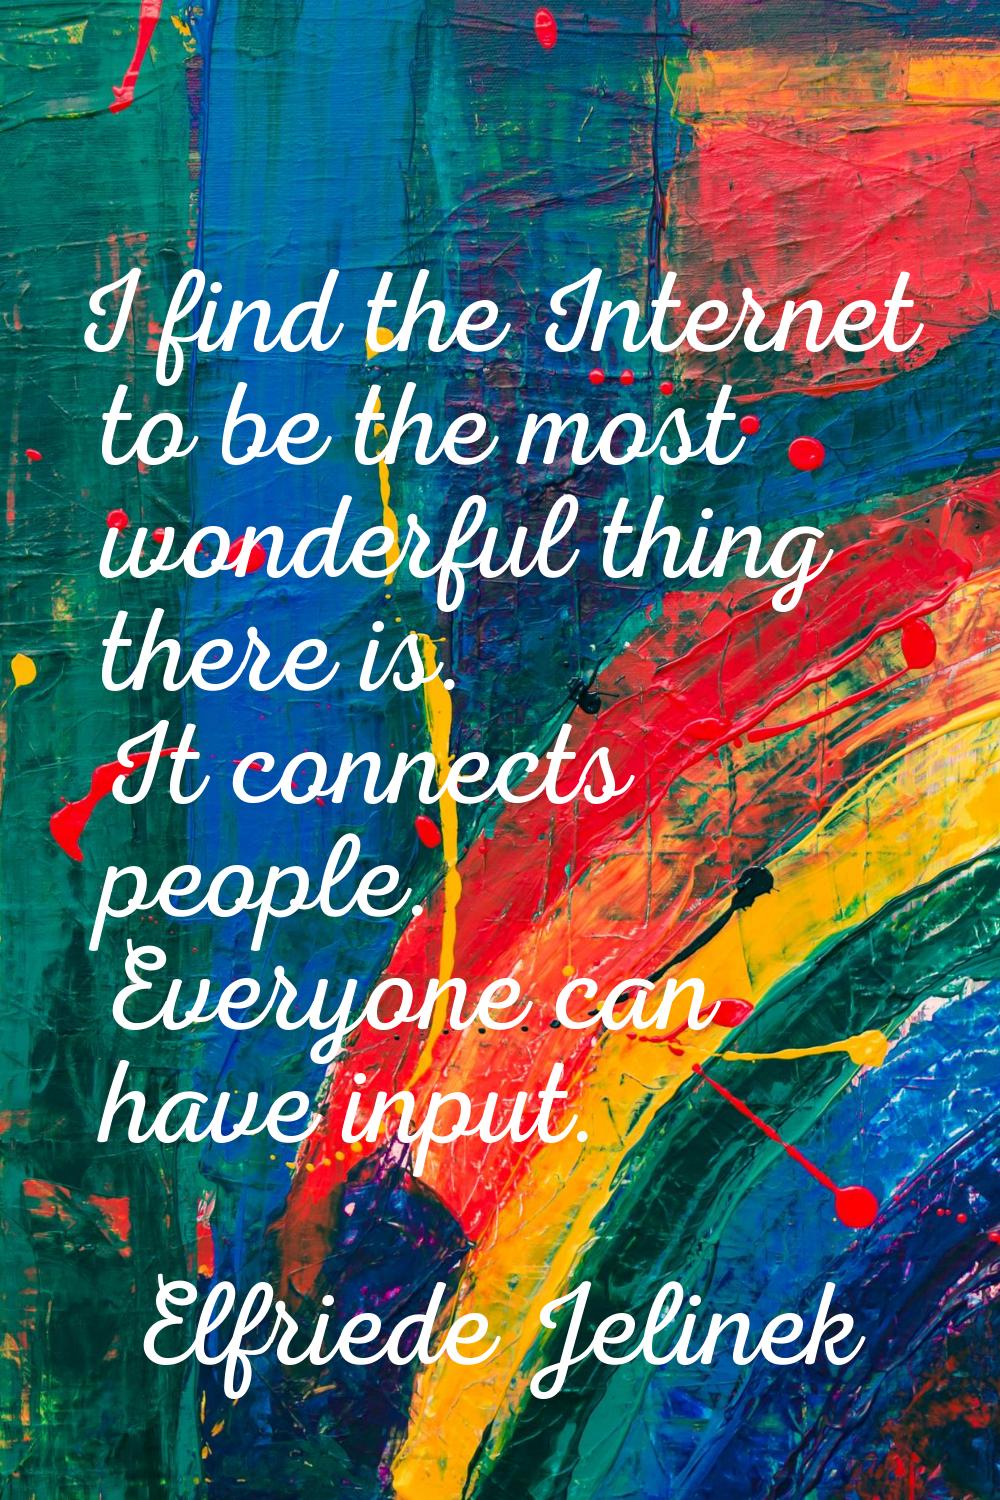 I find the Internet to be the most wonderful thing there is. It connects people. Everyone can have 